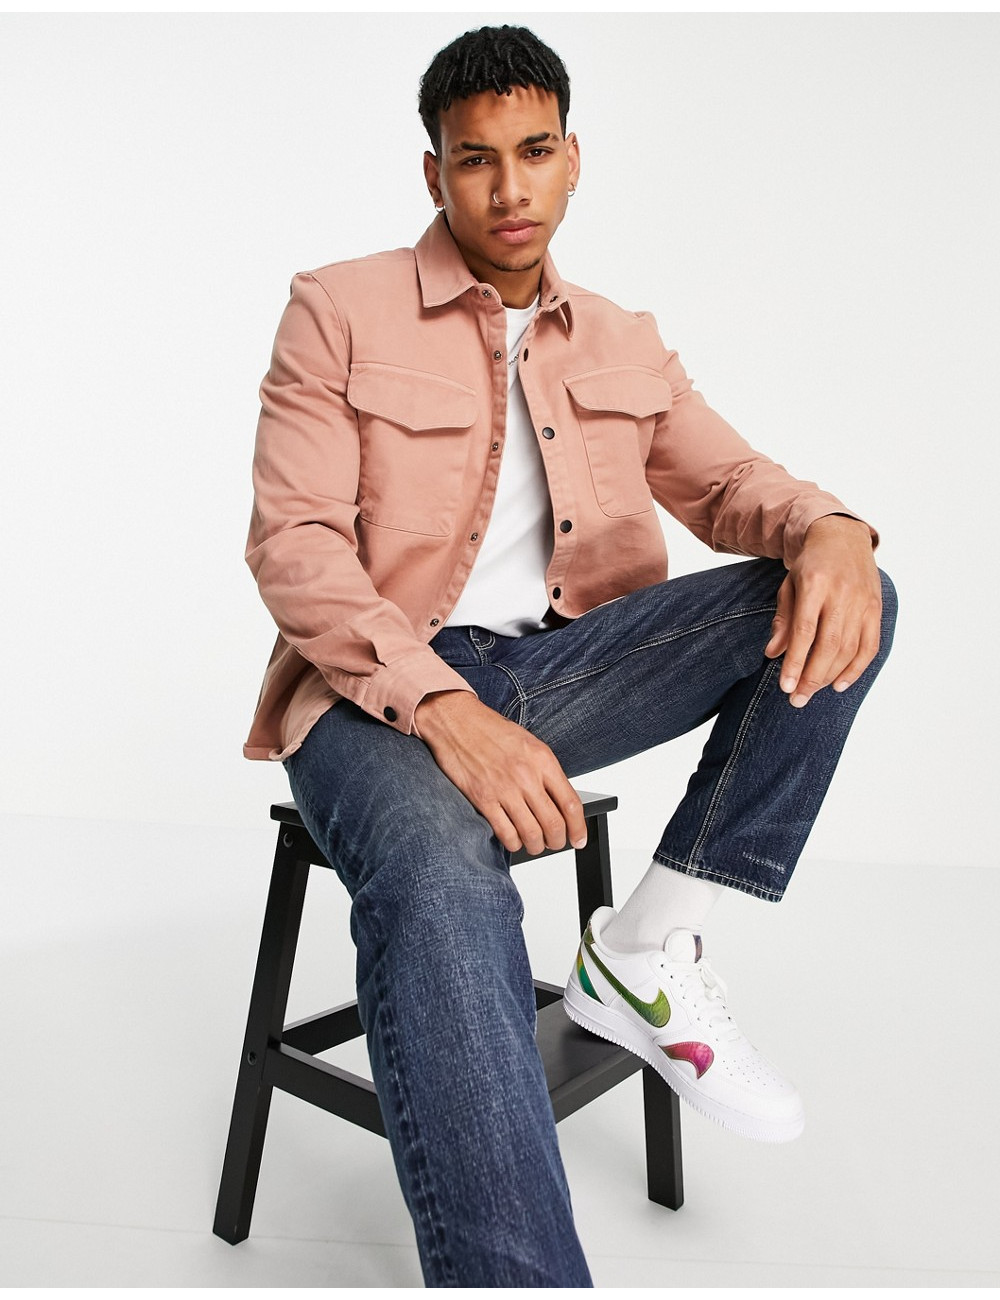 River Island overshirt in pink